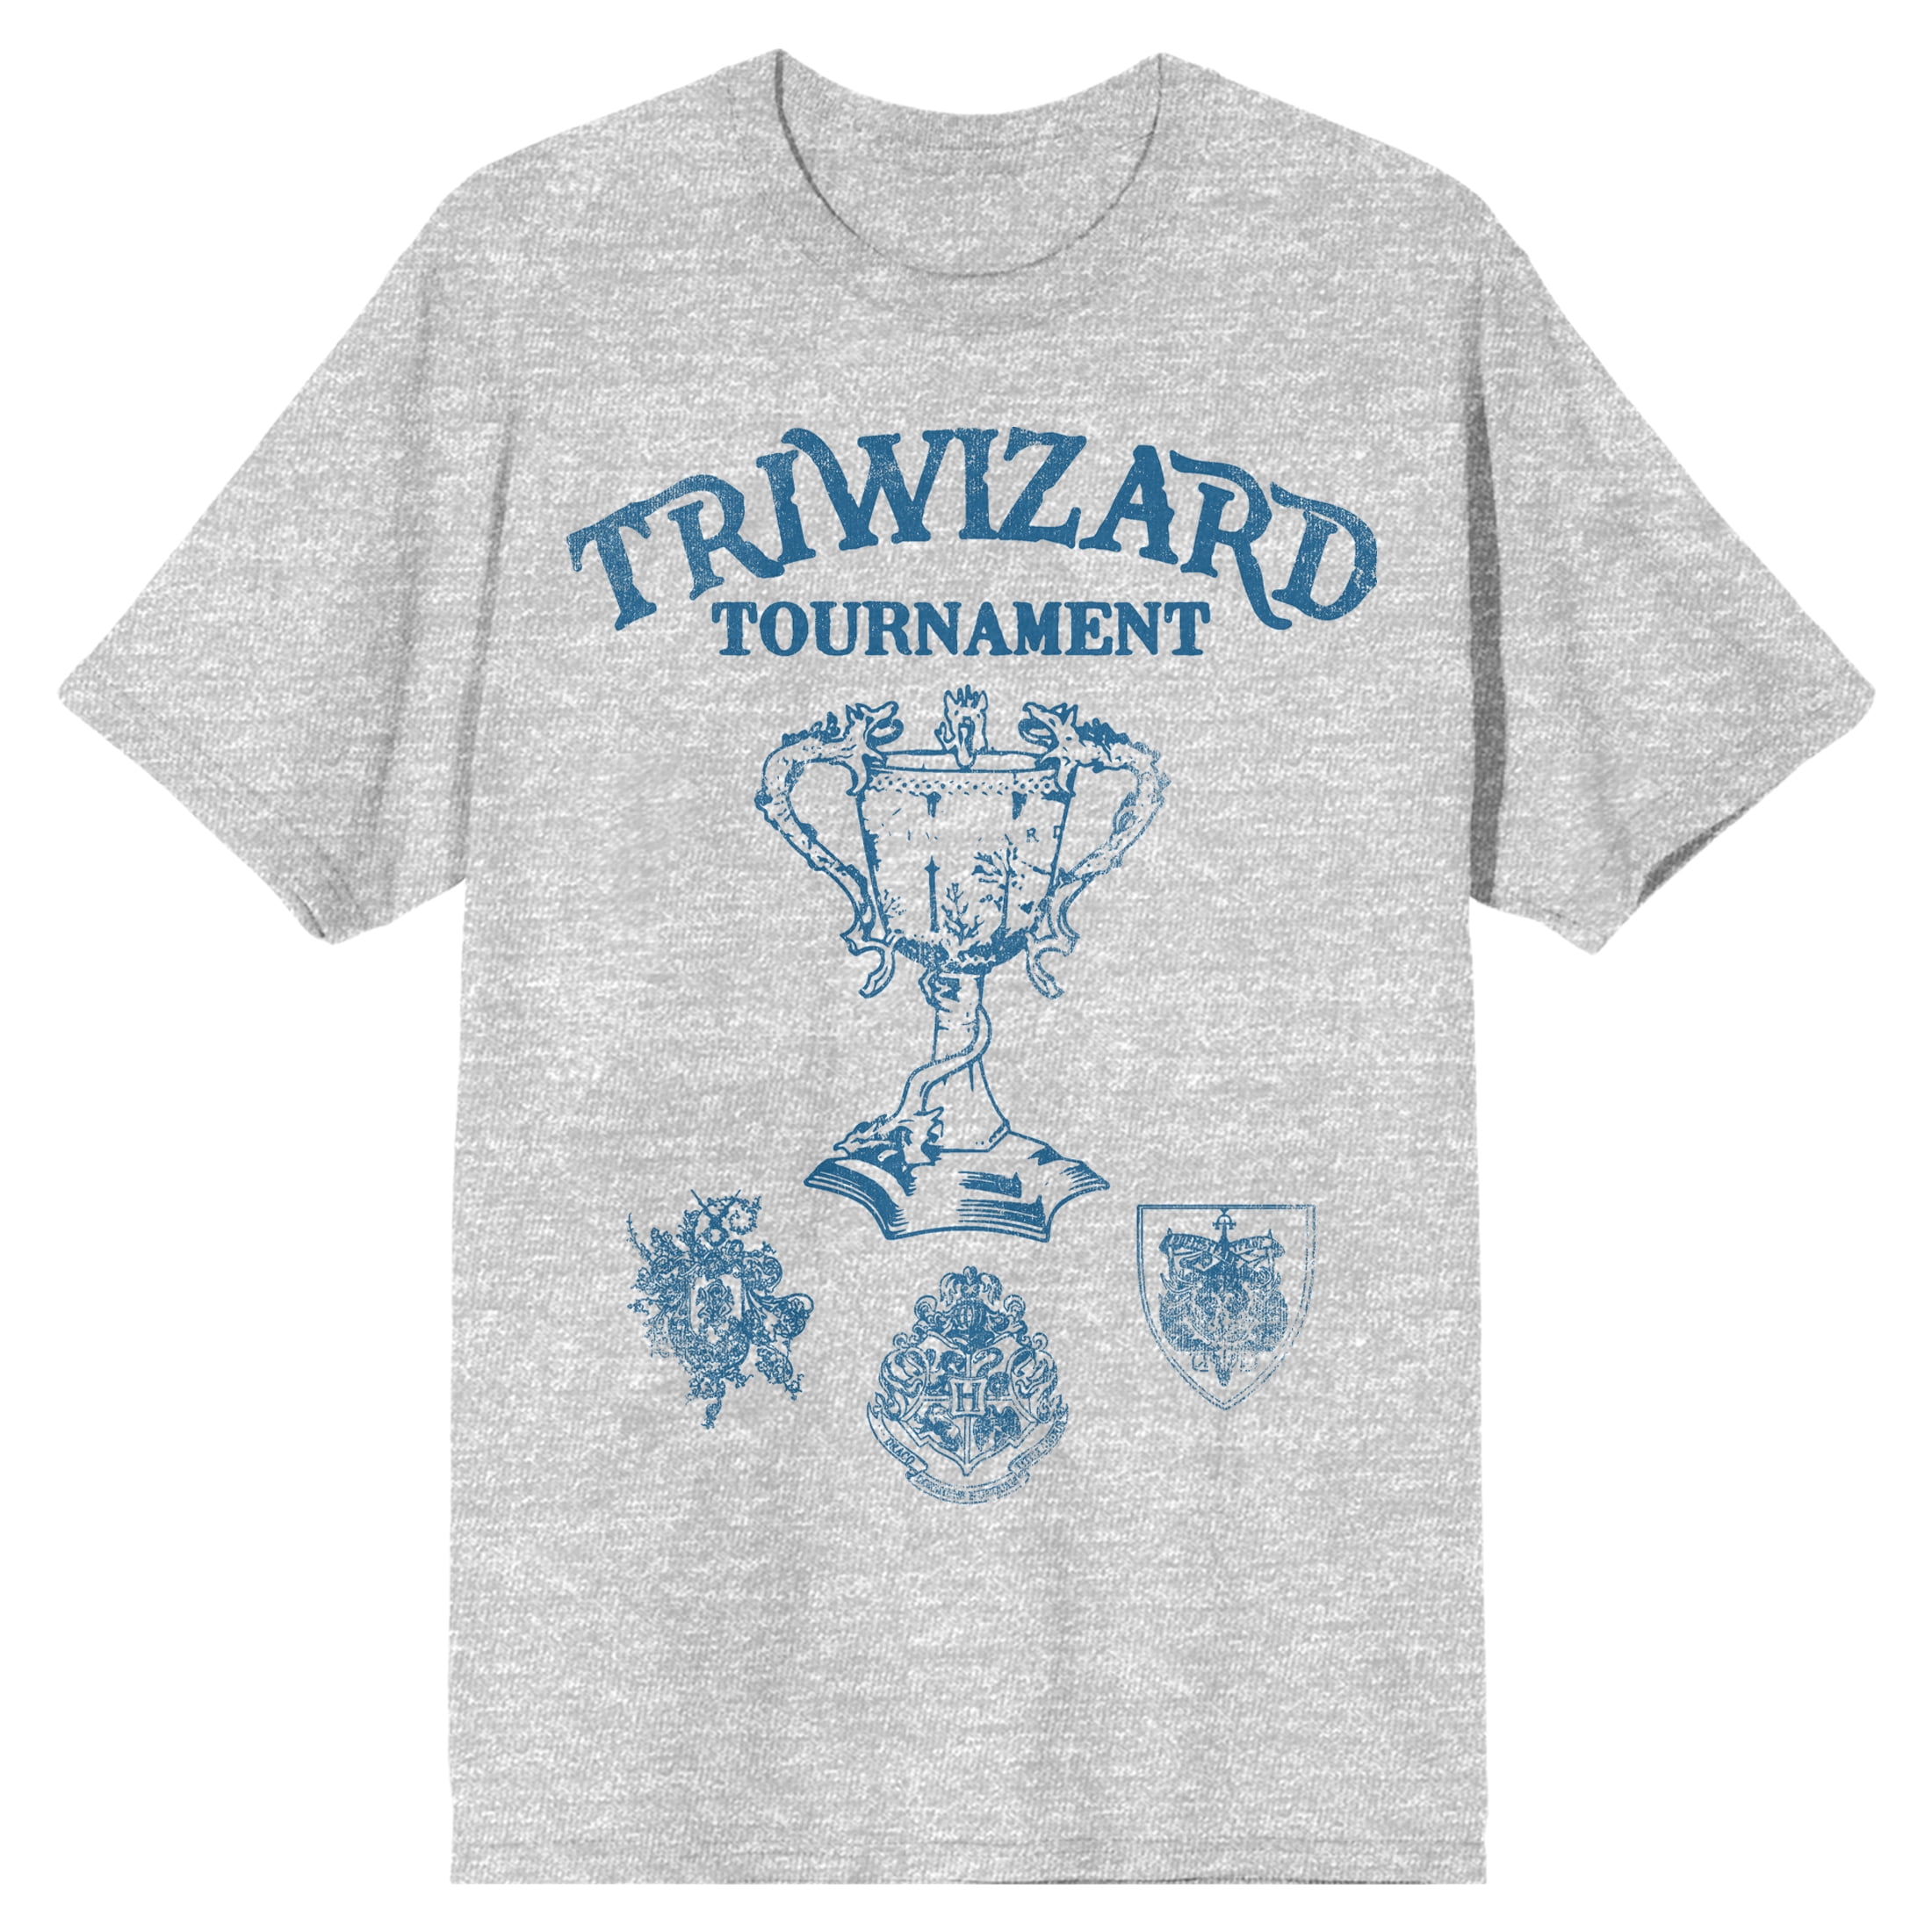 Harry Potter Triwizard Tournament Graphic Men's Athletic Heather Gray T- Shirt-XL